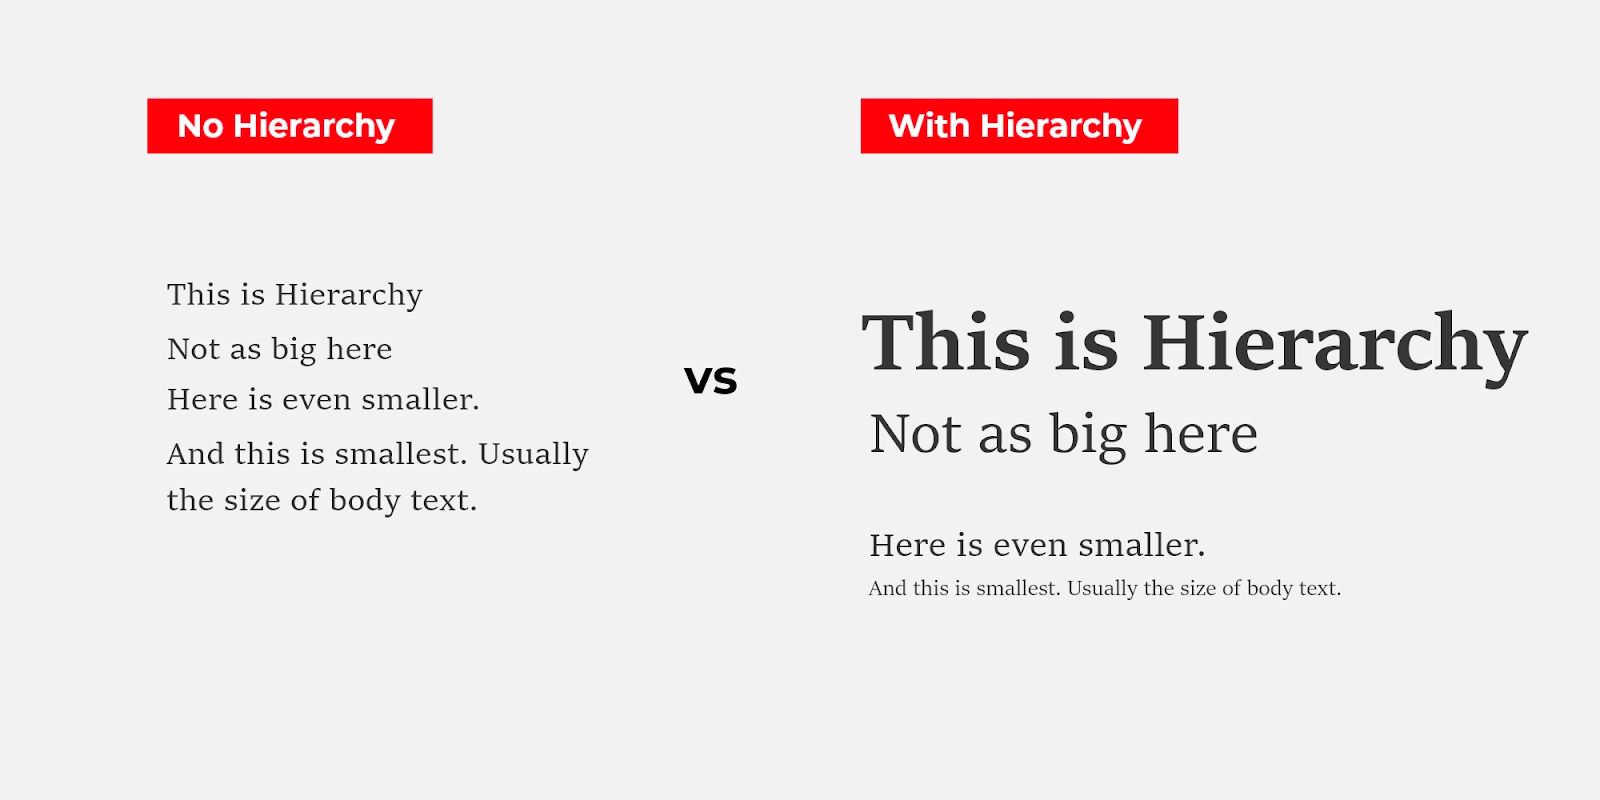 Visual hierarchy is a key design tip for international ecommerce stores